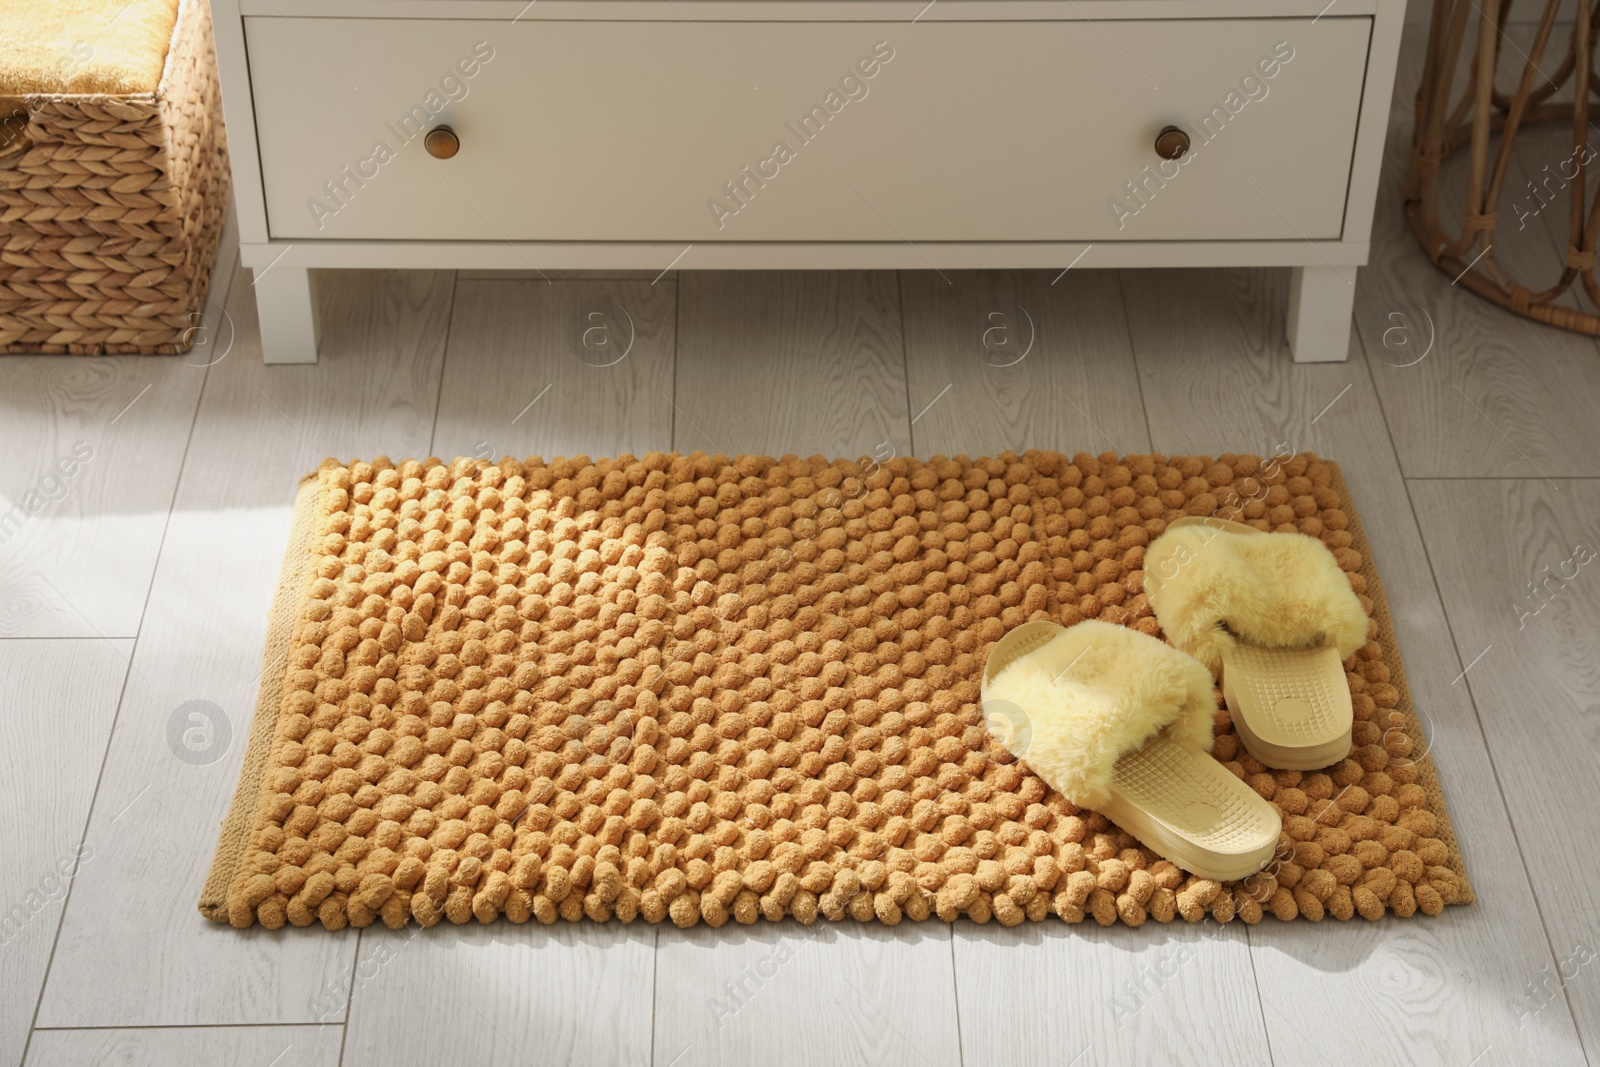 Photo of Stylish orange mat with slippers near chest of drawers in bathroom